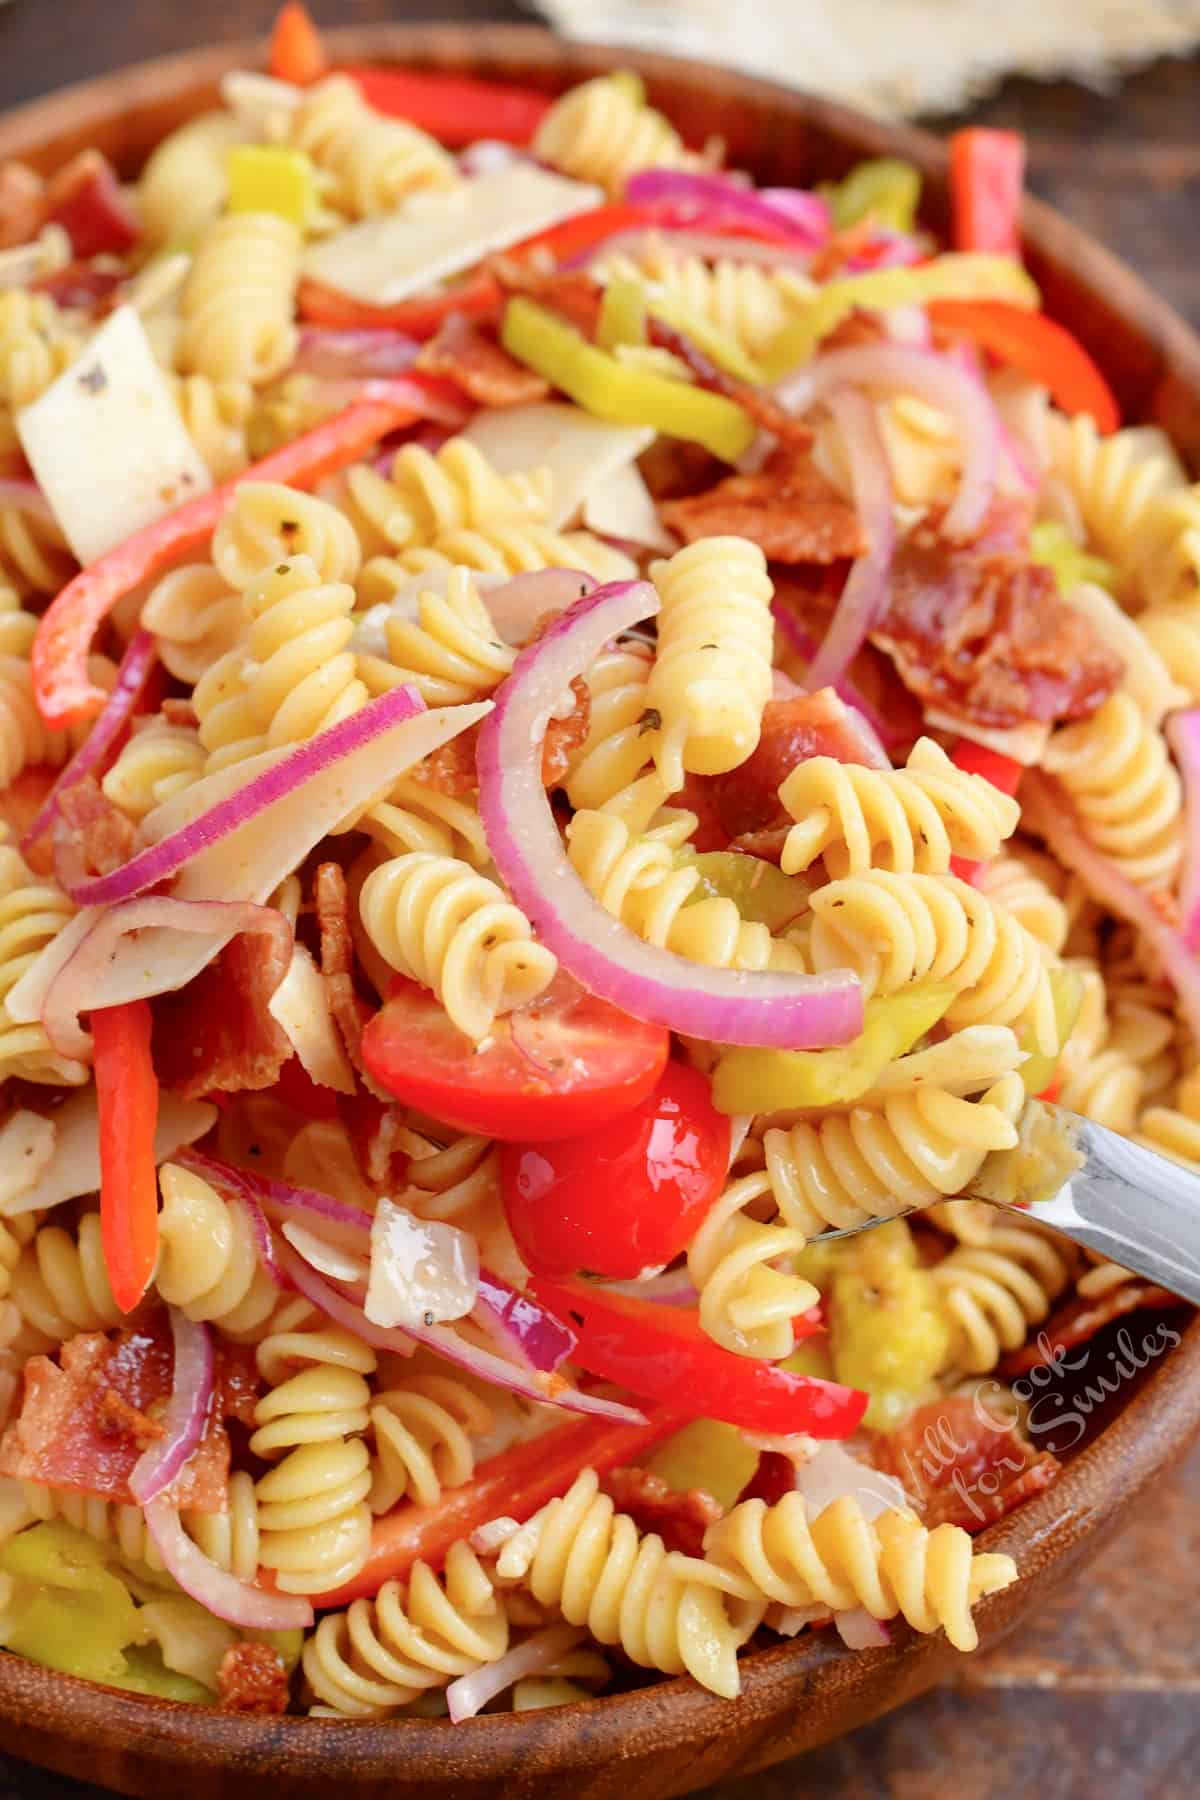 Pasta salad is tossed and presented in a large wooden bowl. 